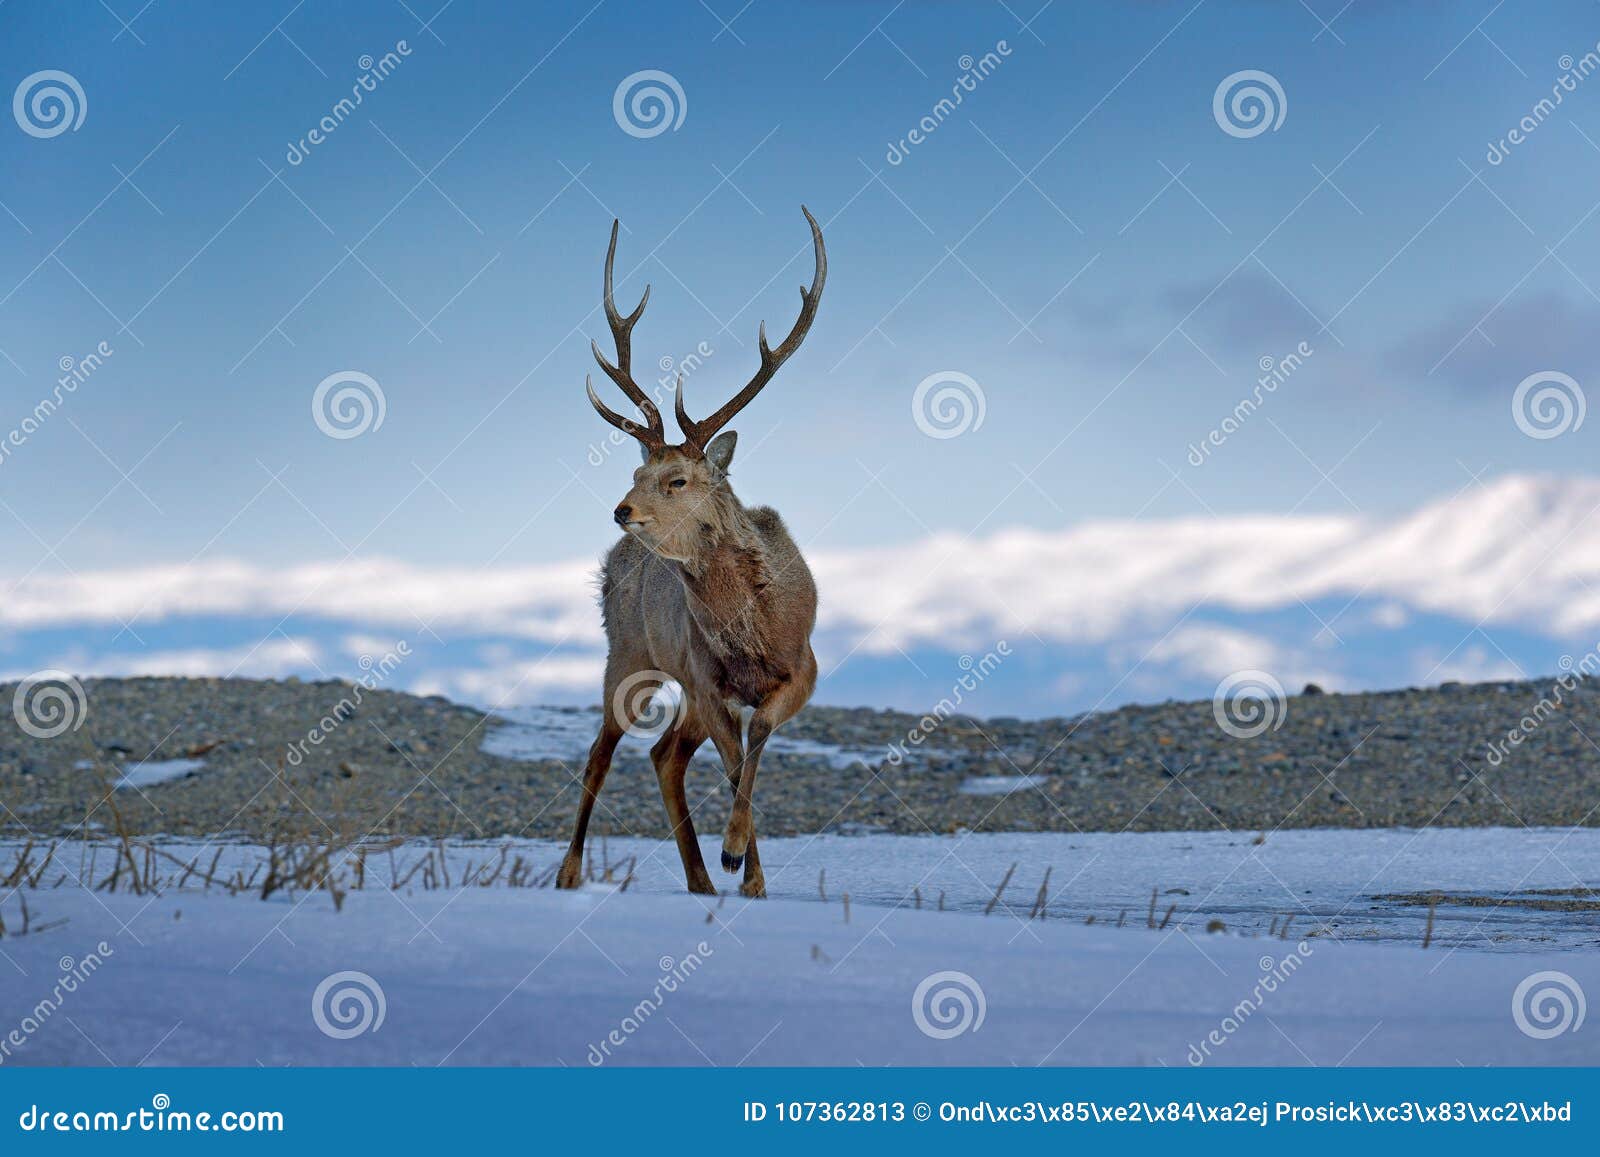 hokkaido sika deer, cervus nippon yesoensis, in snow meadow, winter mountains and forest in the background. animal with antler in